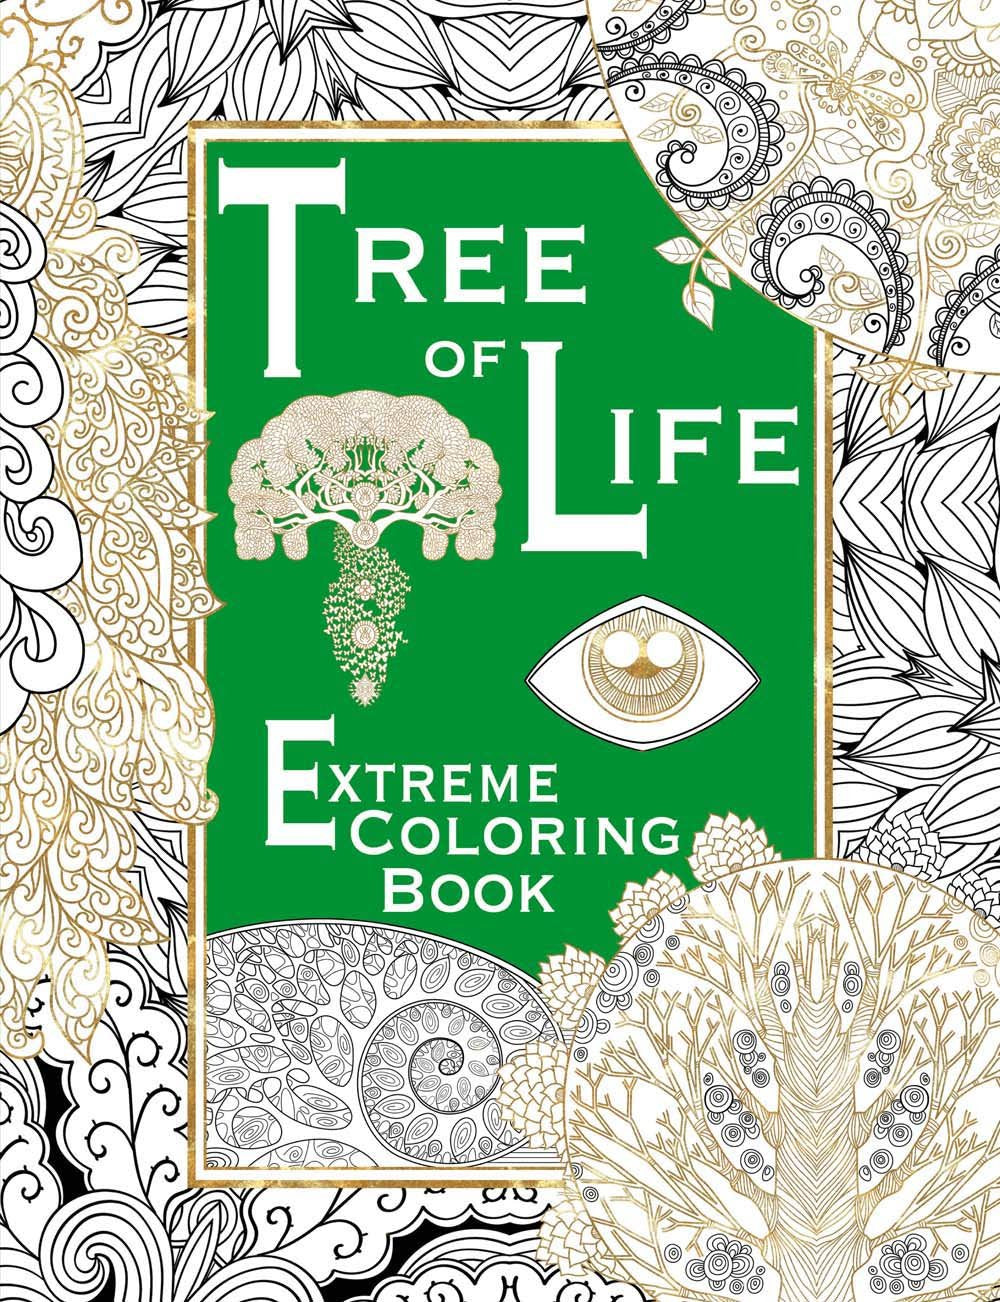 Tree of Life Extreme Coloring Books